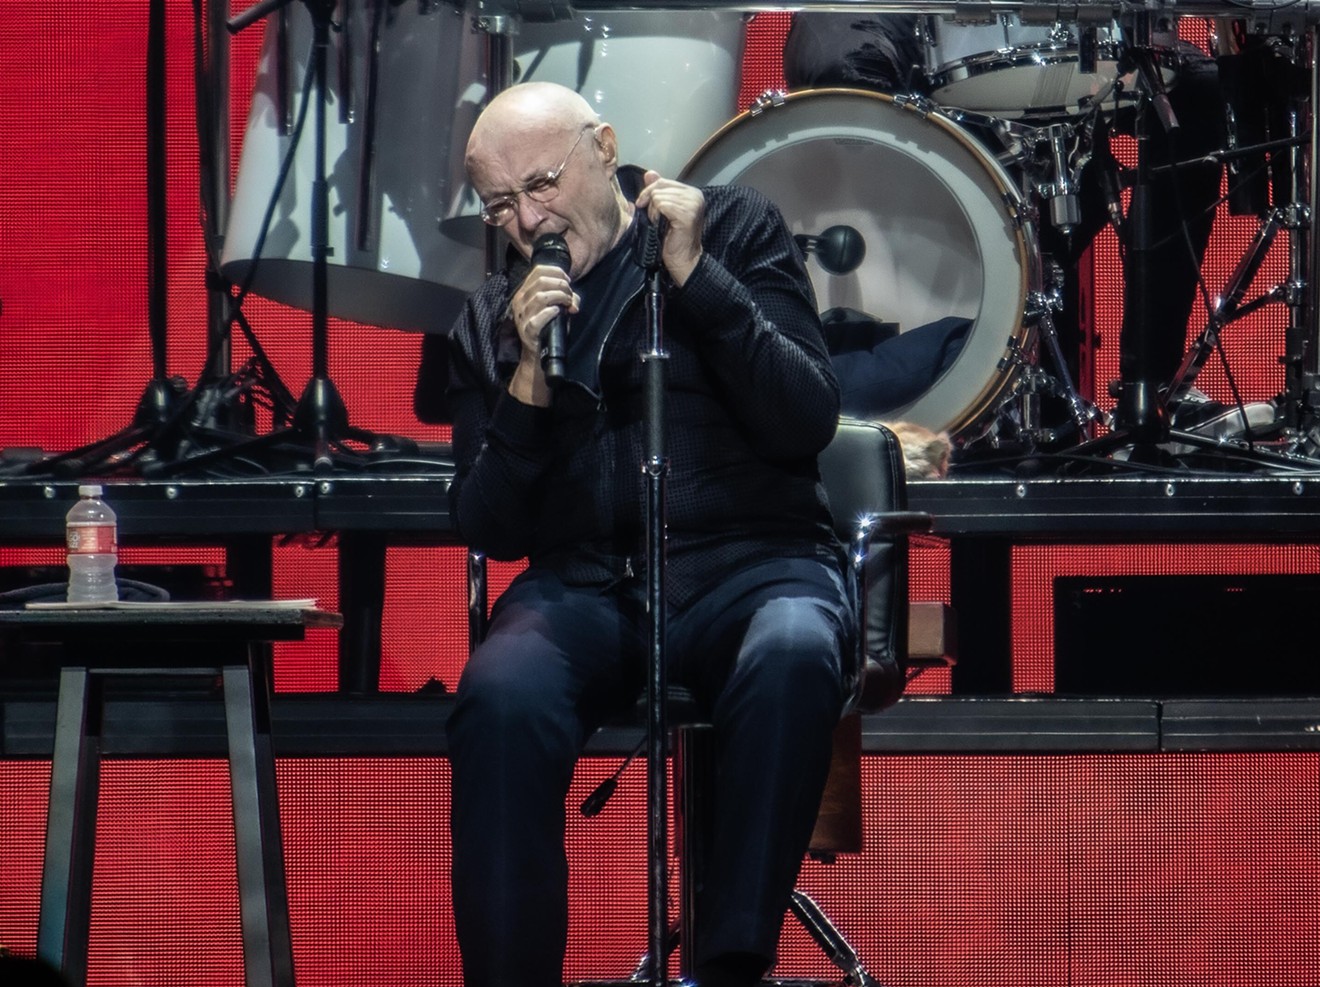 Even when he's seated, Phil Collins is still a rock star.